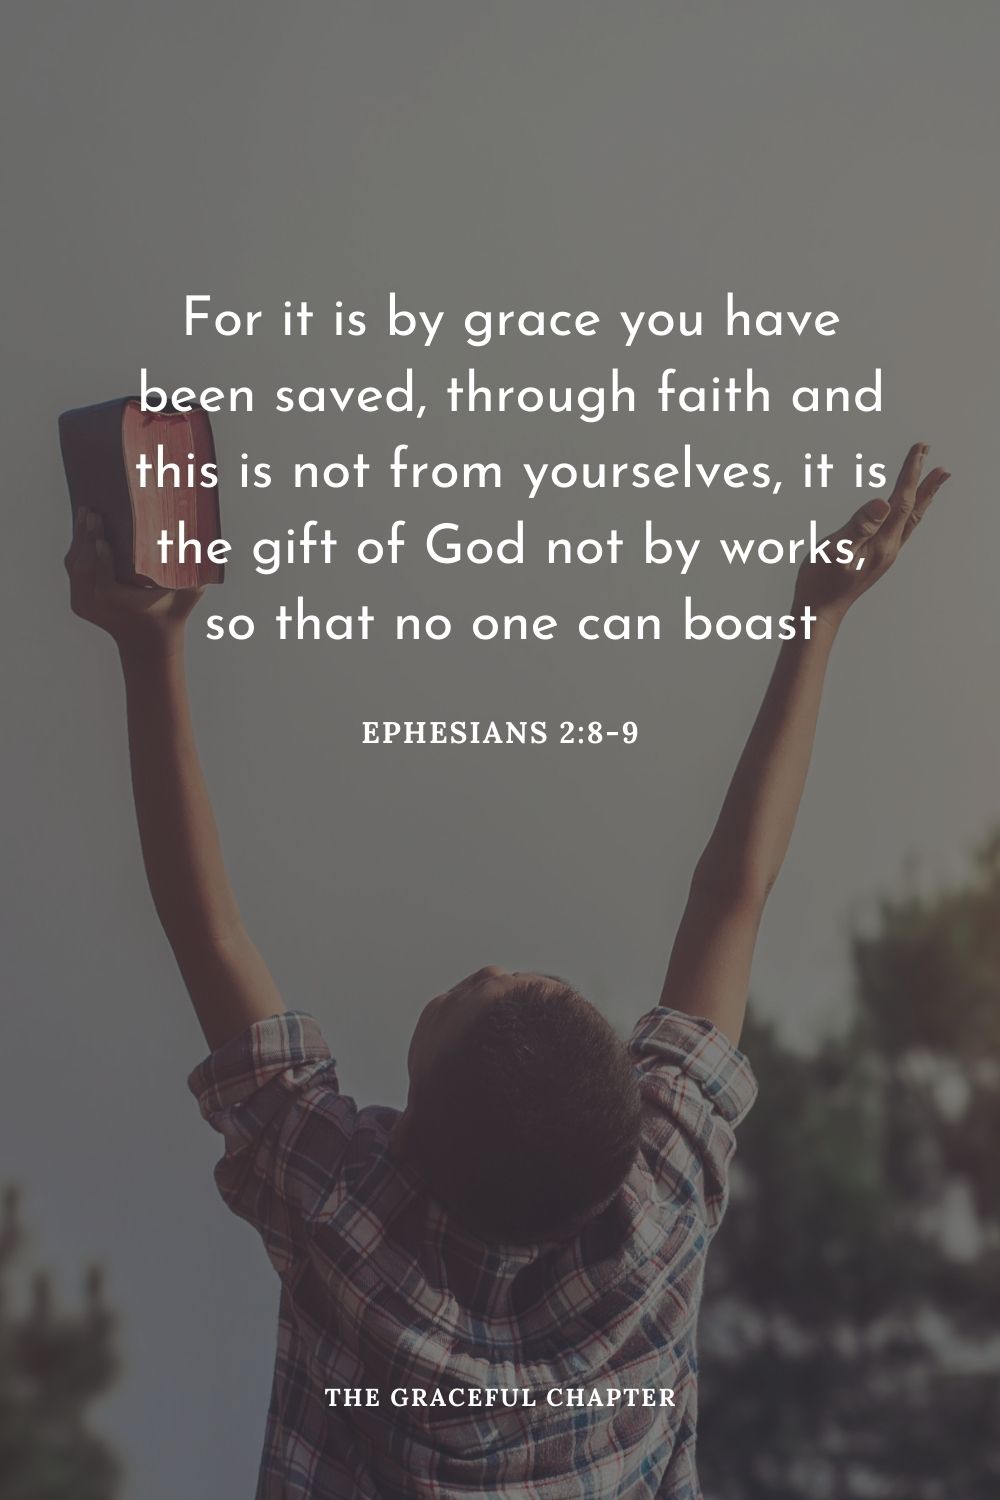 For it is by grace you have been saved, through faith and this is not from yourselves, it is the gift of God not by works, so that no one can boast